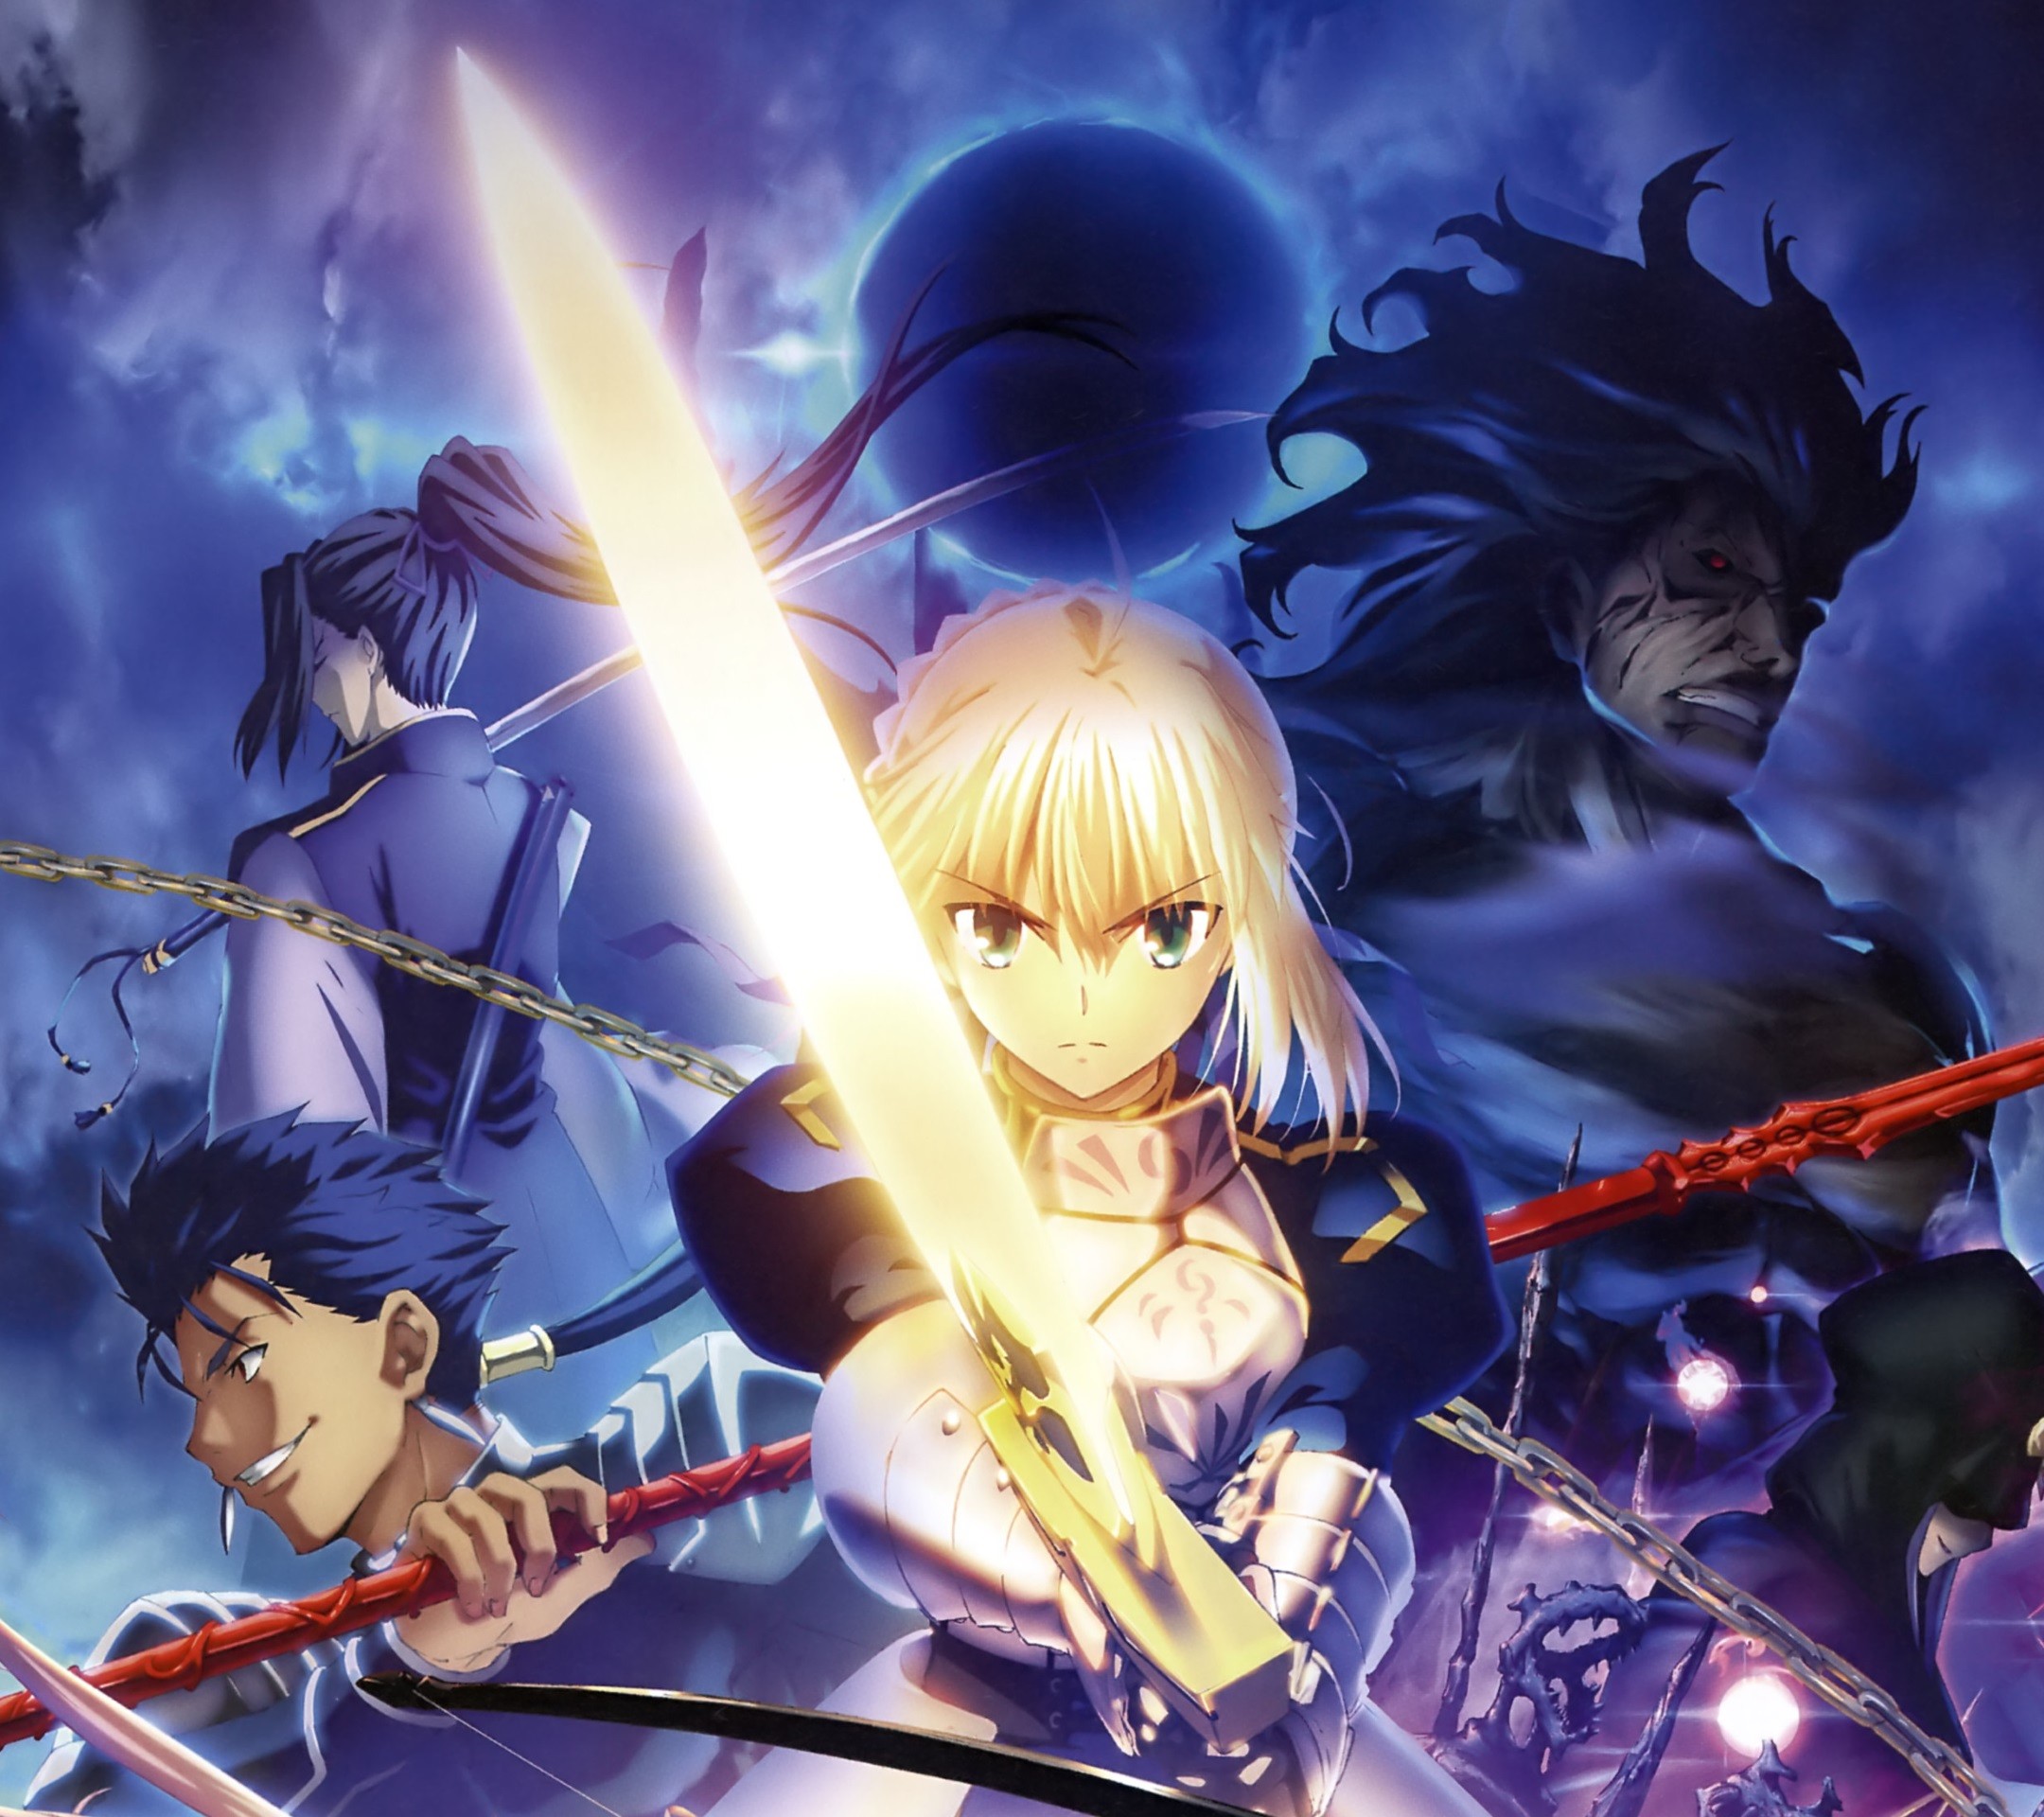 Fate Stay Night Unlimited Blade Works wallpaper ·① Download free cool